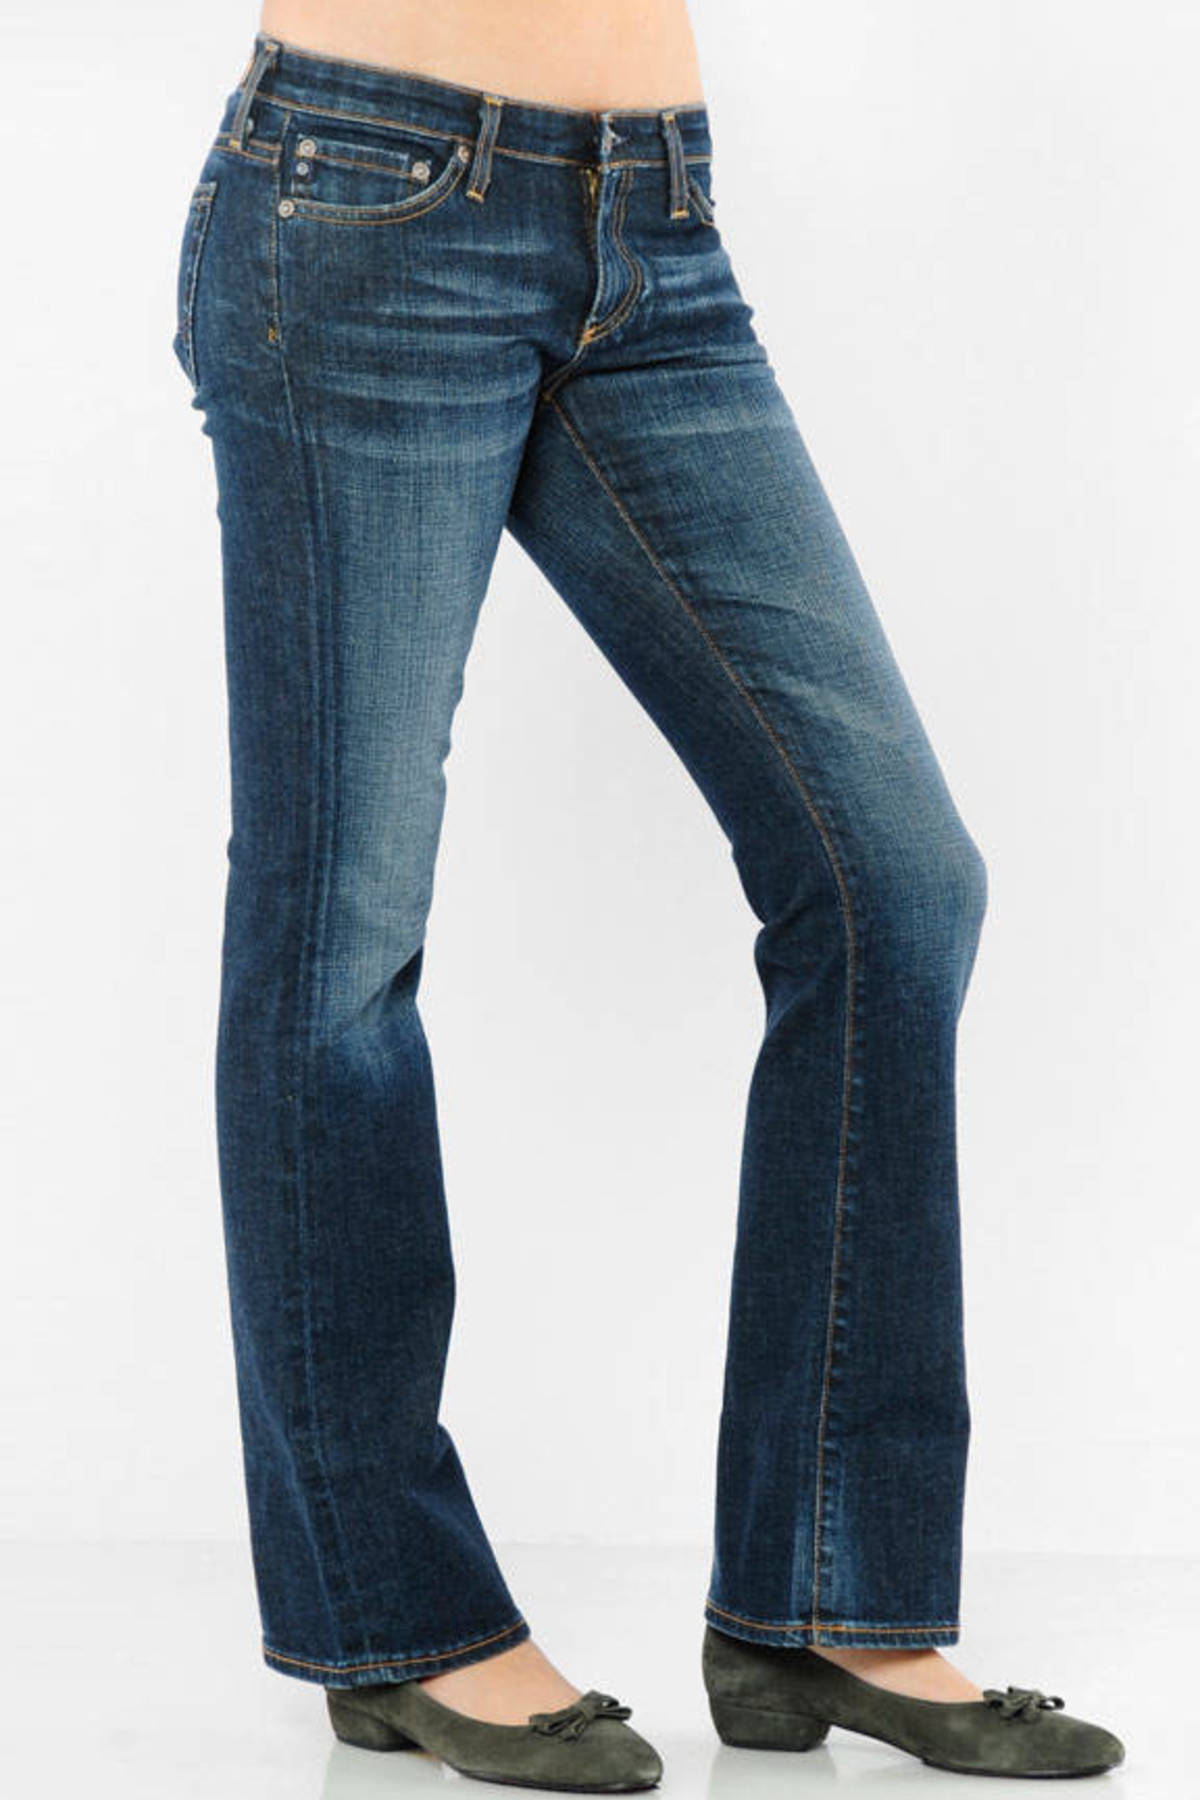 Angelina Petite Bootcut Jeans in Knoll - $92 | Tobi US